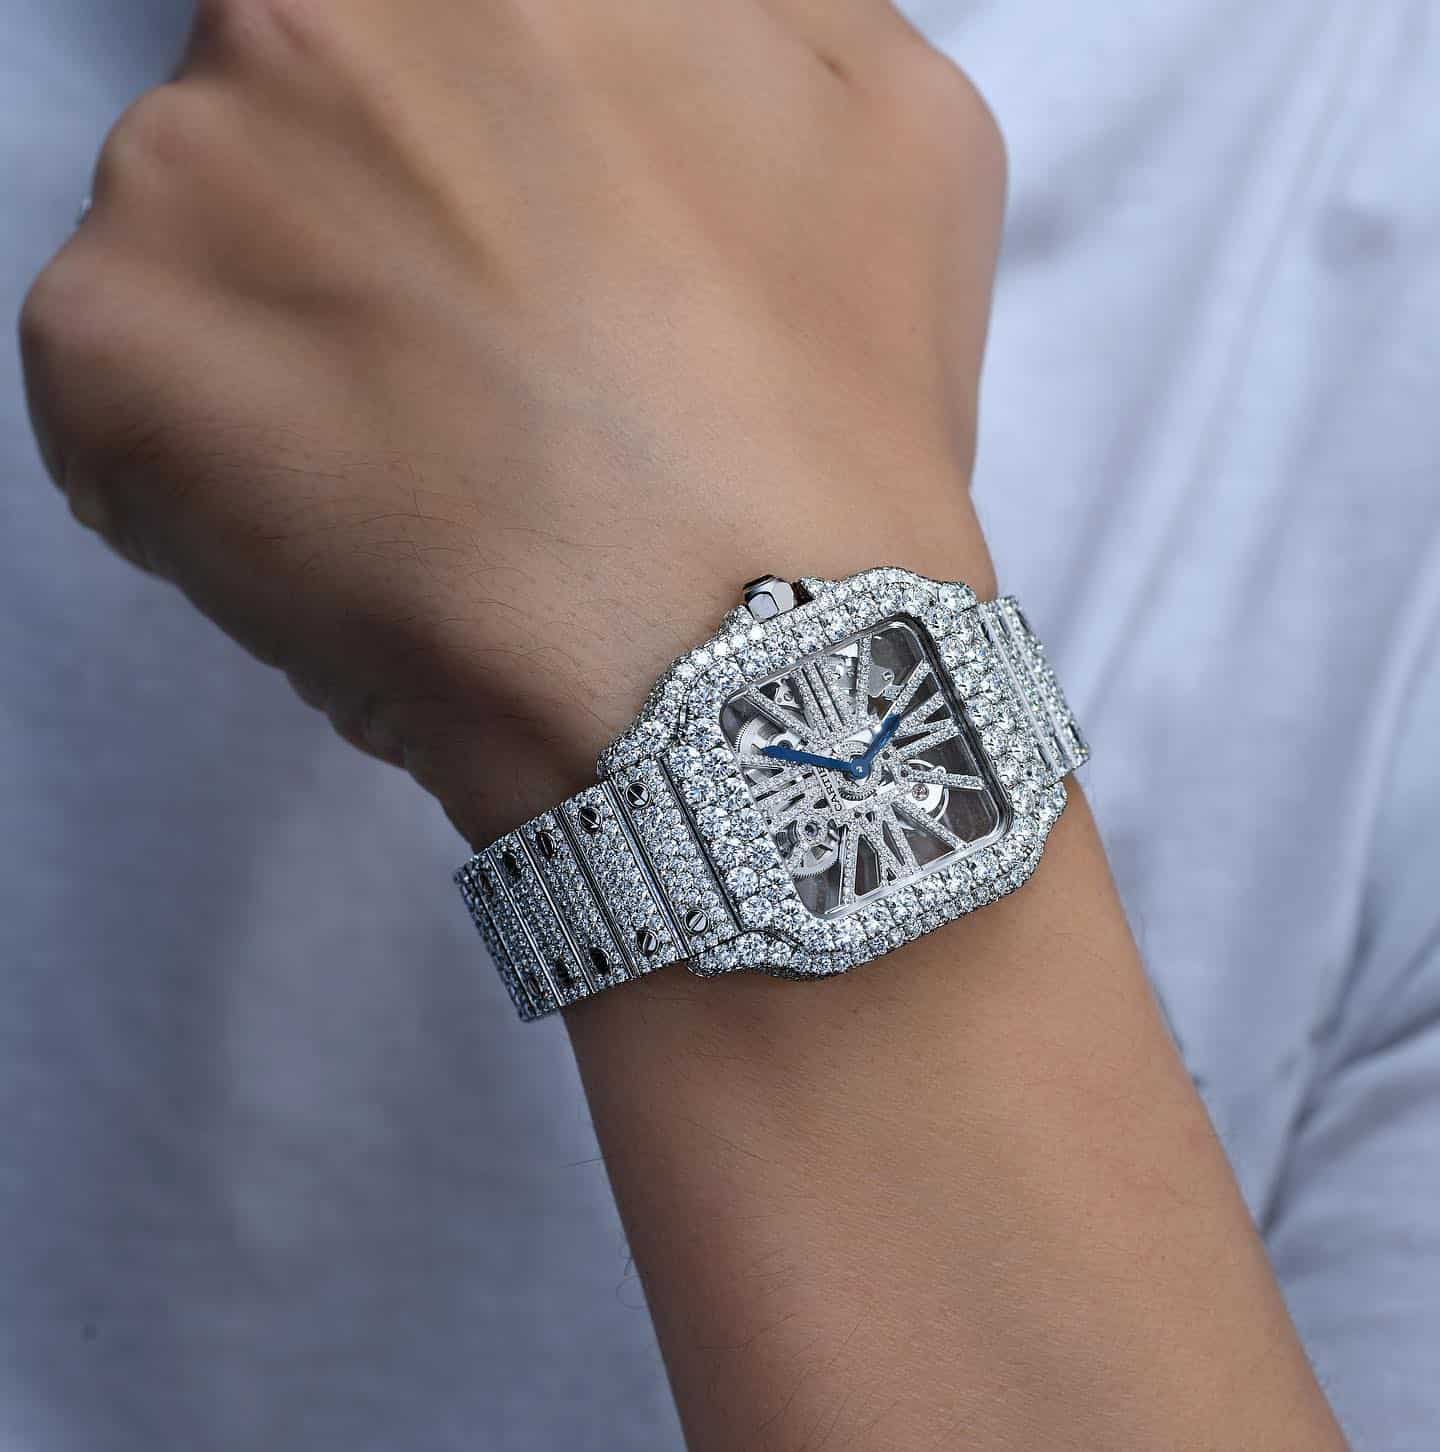 Iced Cartier Watch being styled